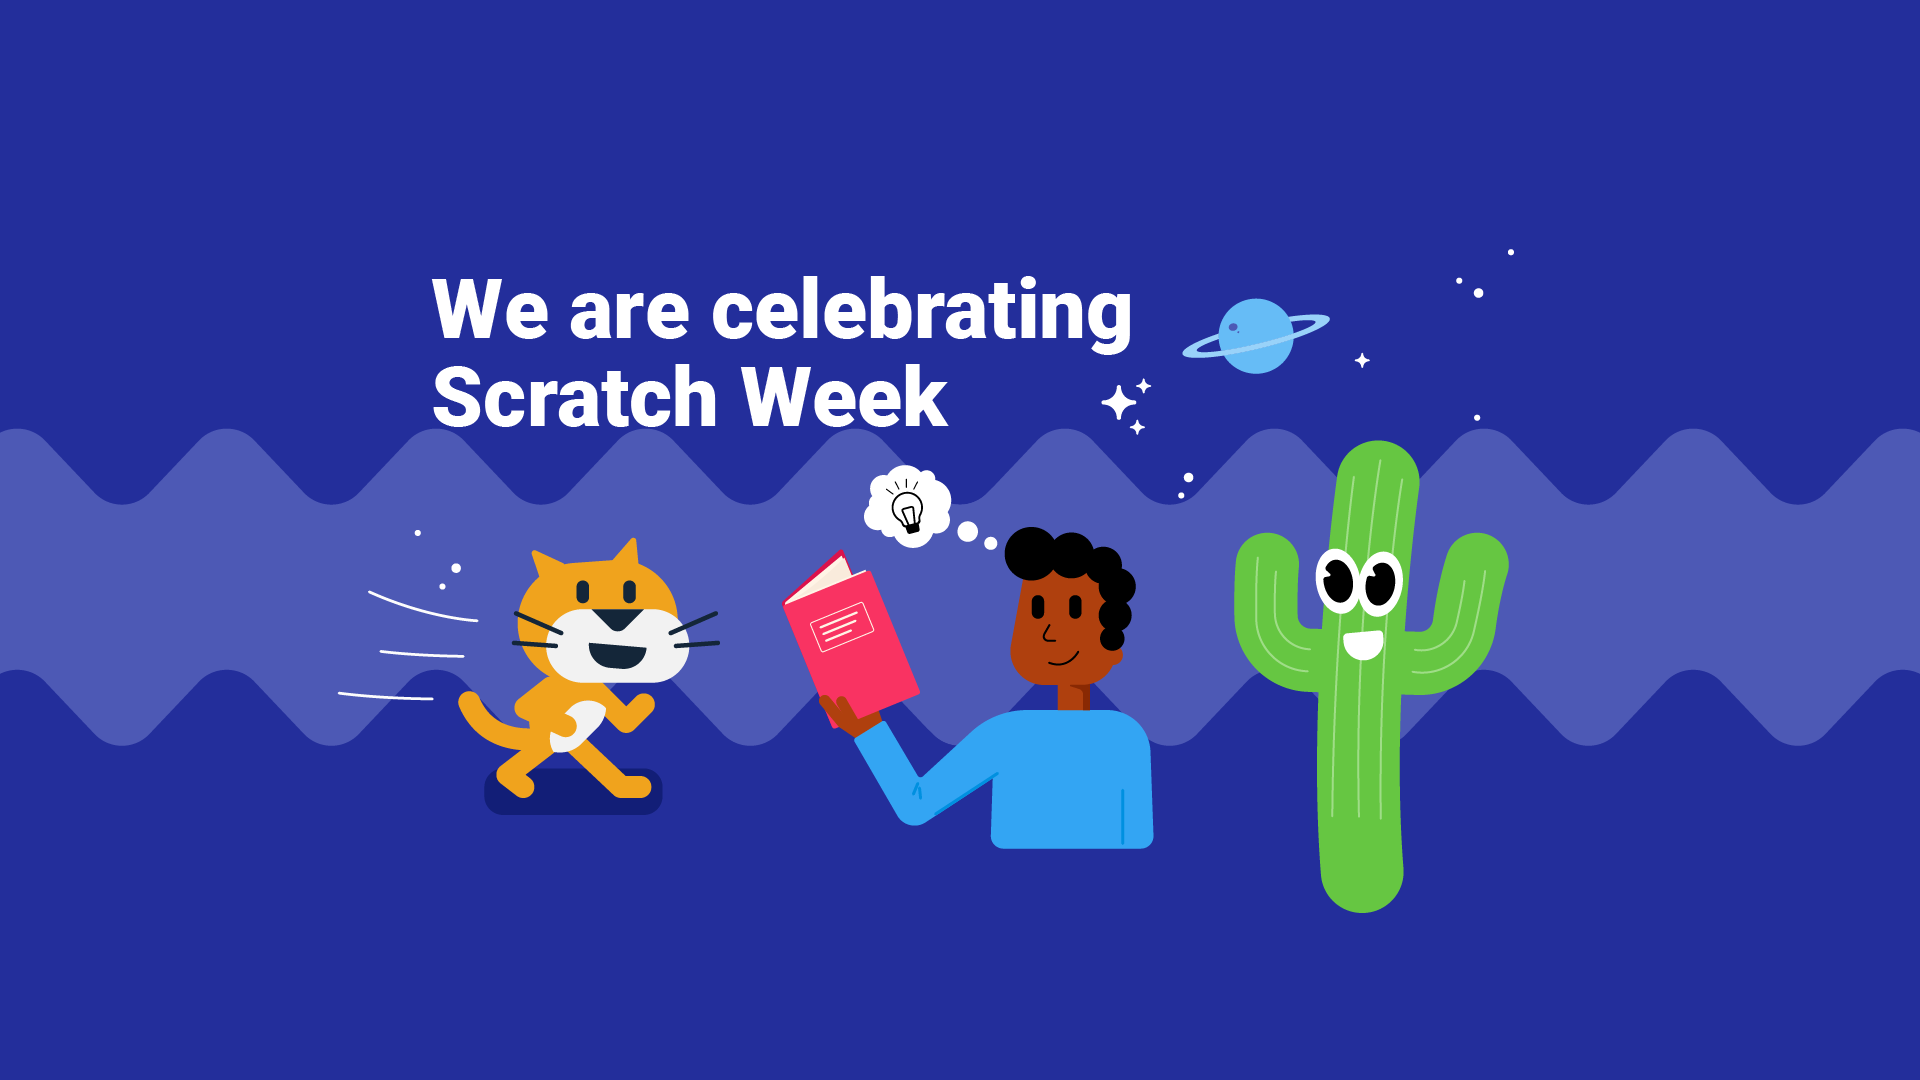 Scratch is a fantastic platform for kids to learn how to code, create  interactive games, animations, stories, and much more. With Scratch…